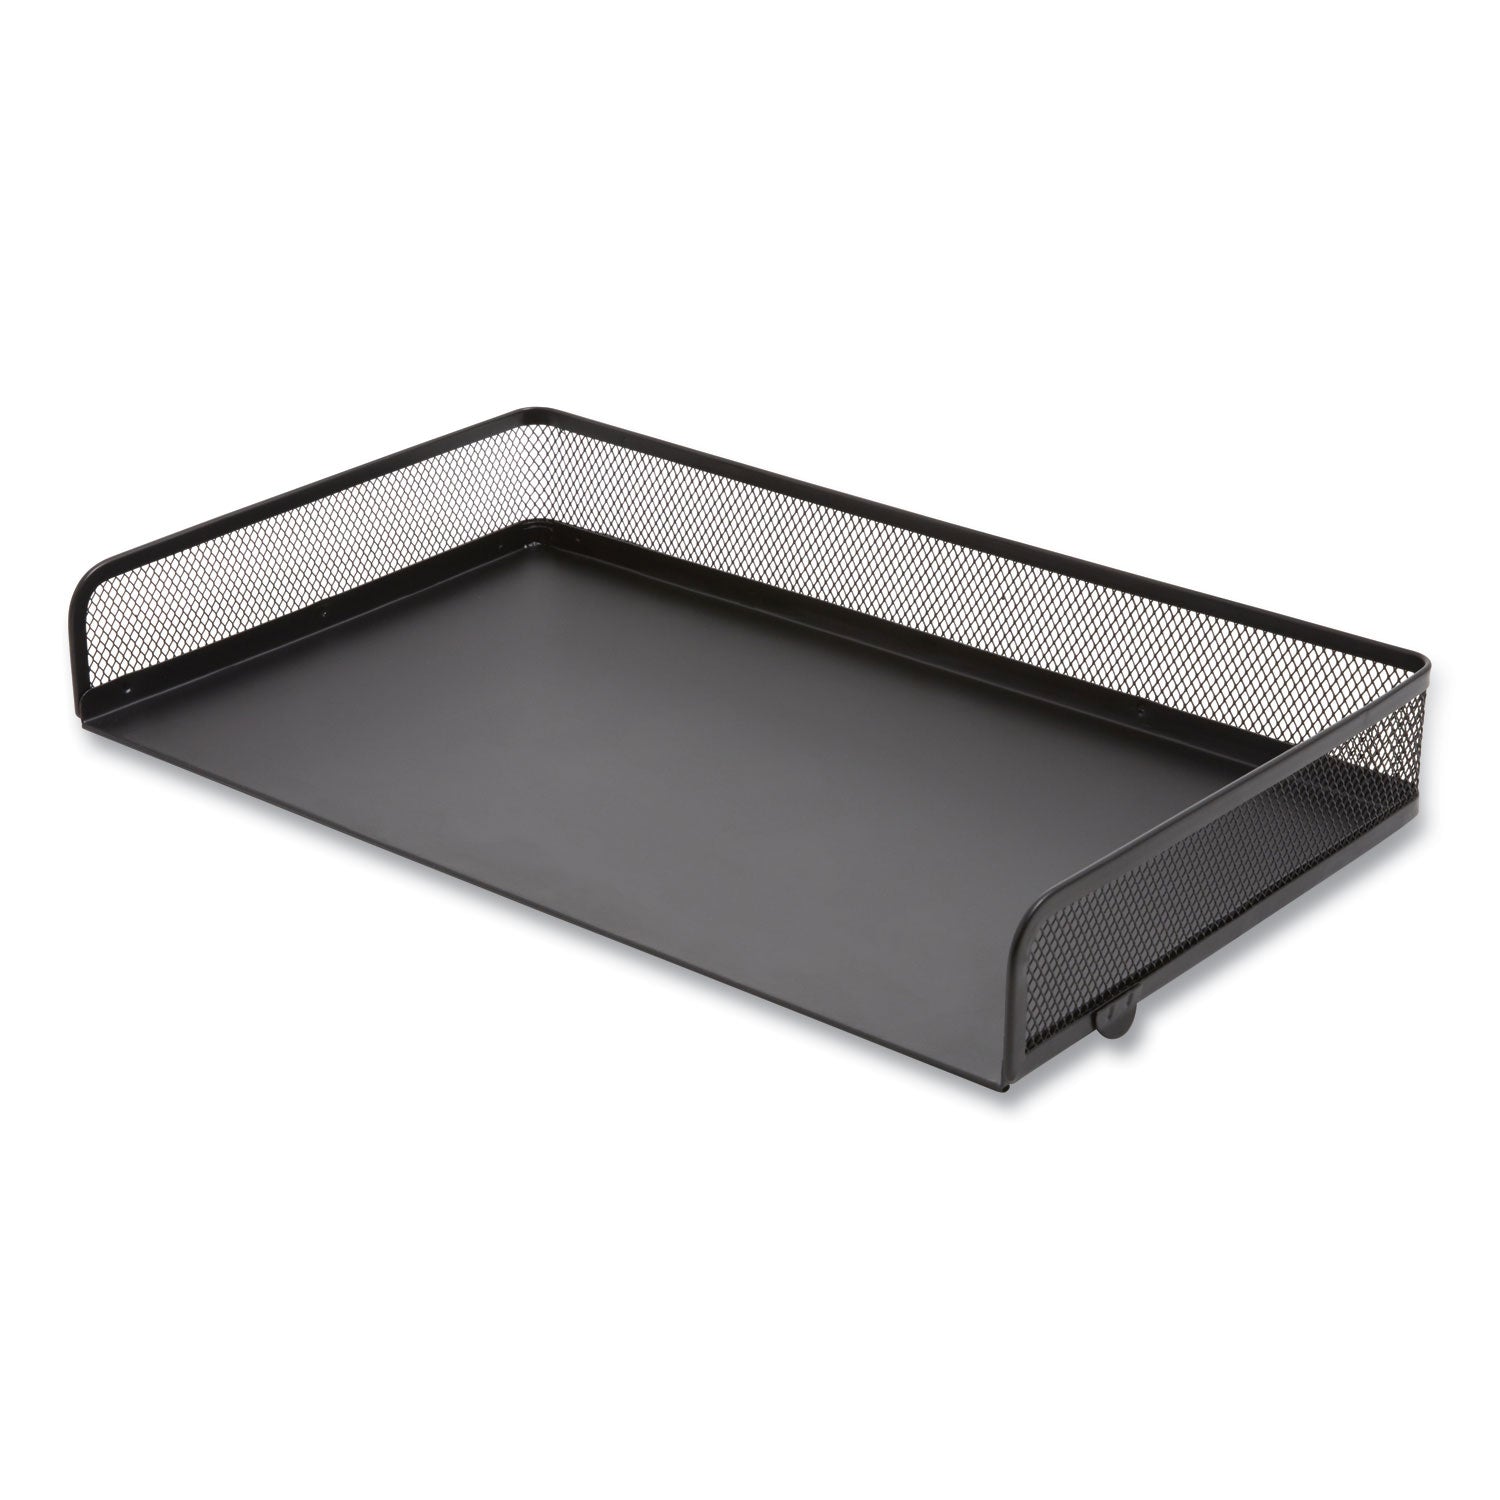 side-load-stackable-wire-mesh-document-tray-1-section-legal-size-1732-x-984-x-276-matte-black_tud24402477 - 4